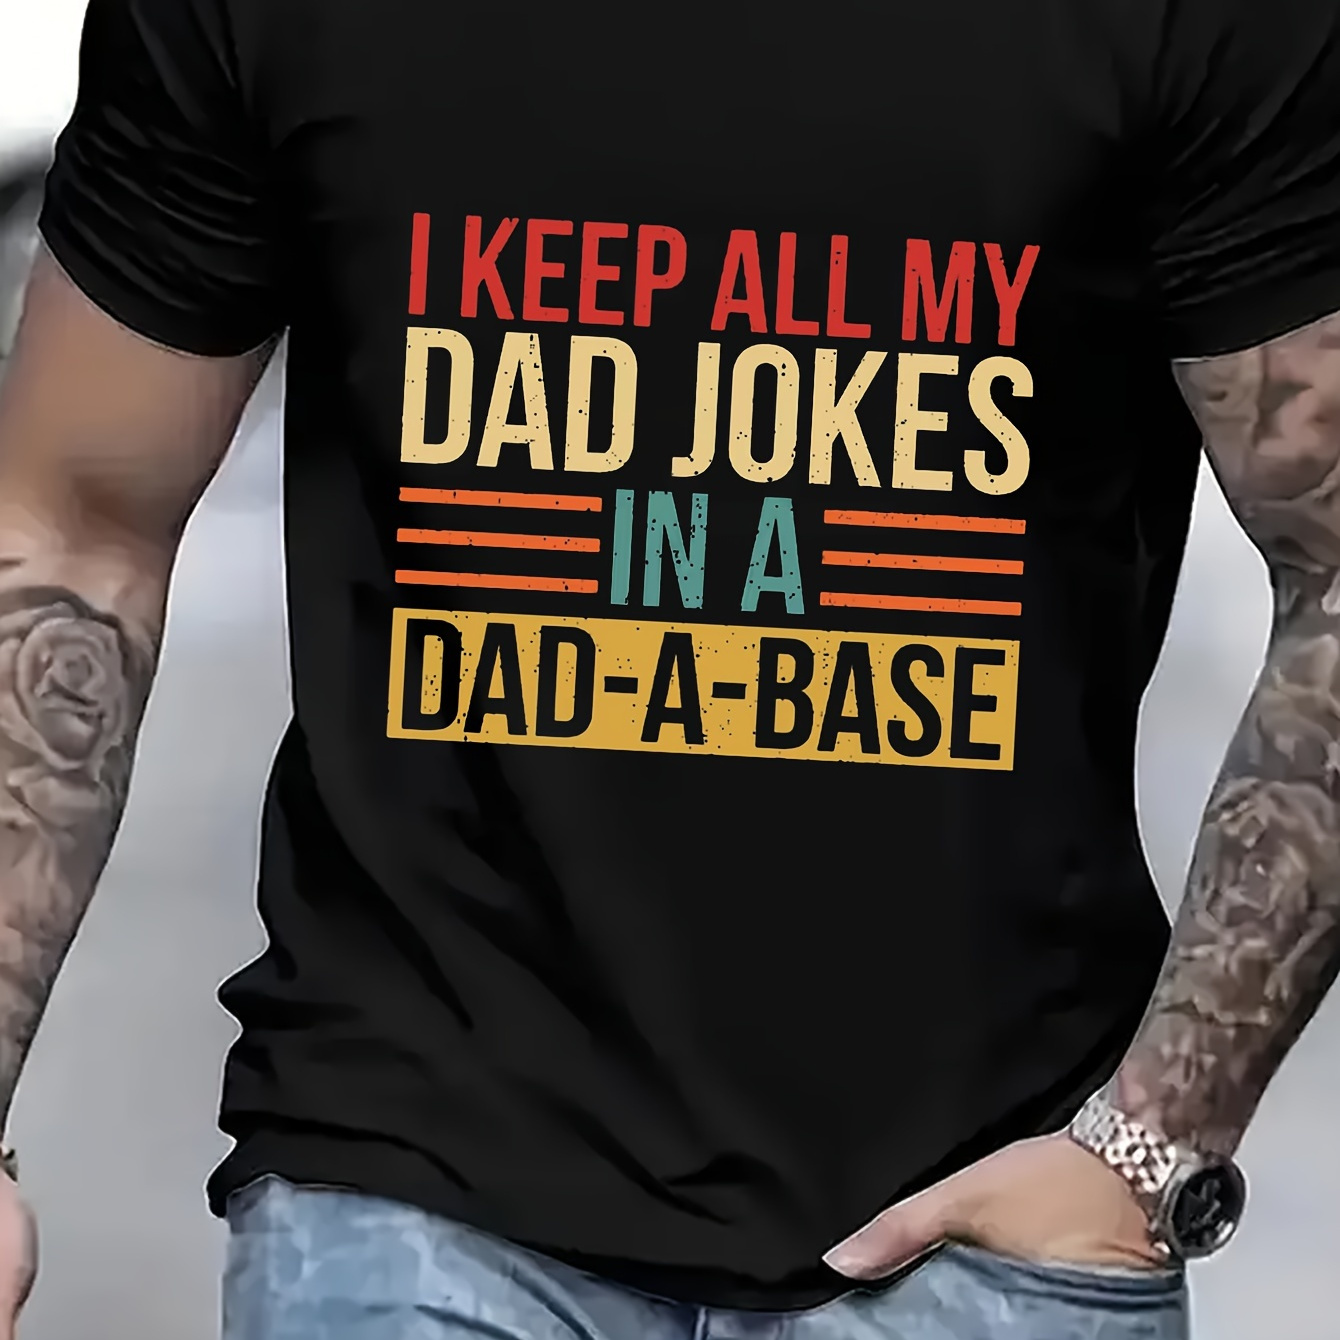 

I Keep Dad Jokes In A Dad-a-base Men's Front Print T-shirt 100% Cotton Graphic Tee Summer Casual Tee Streetwear Top